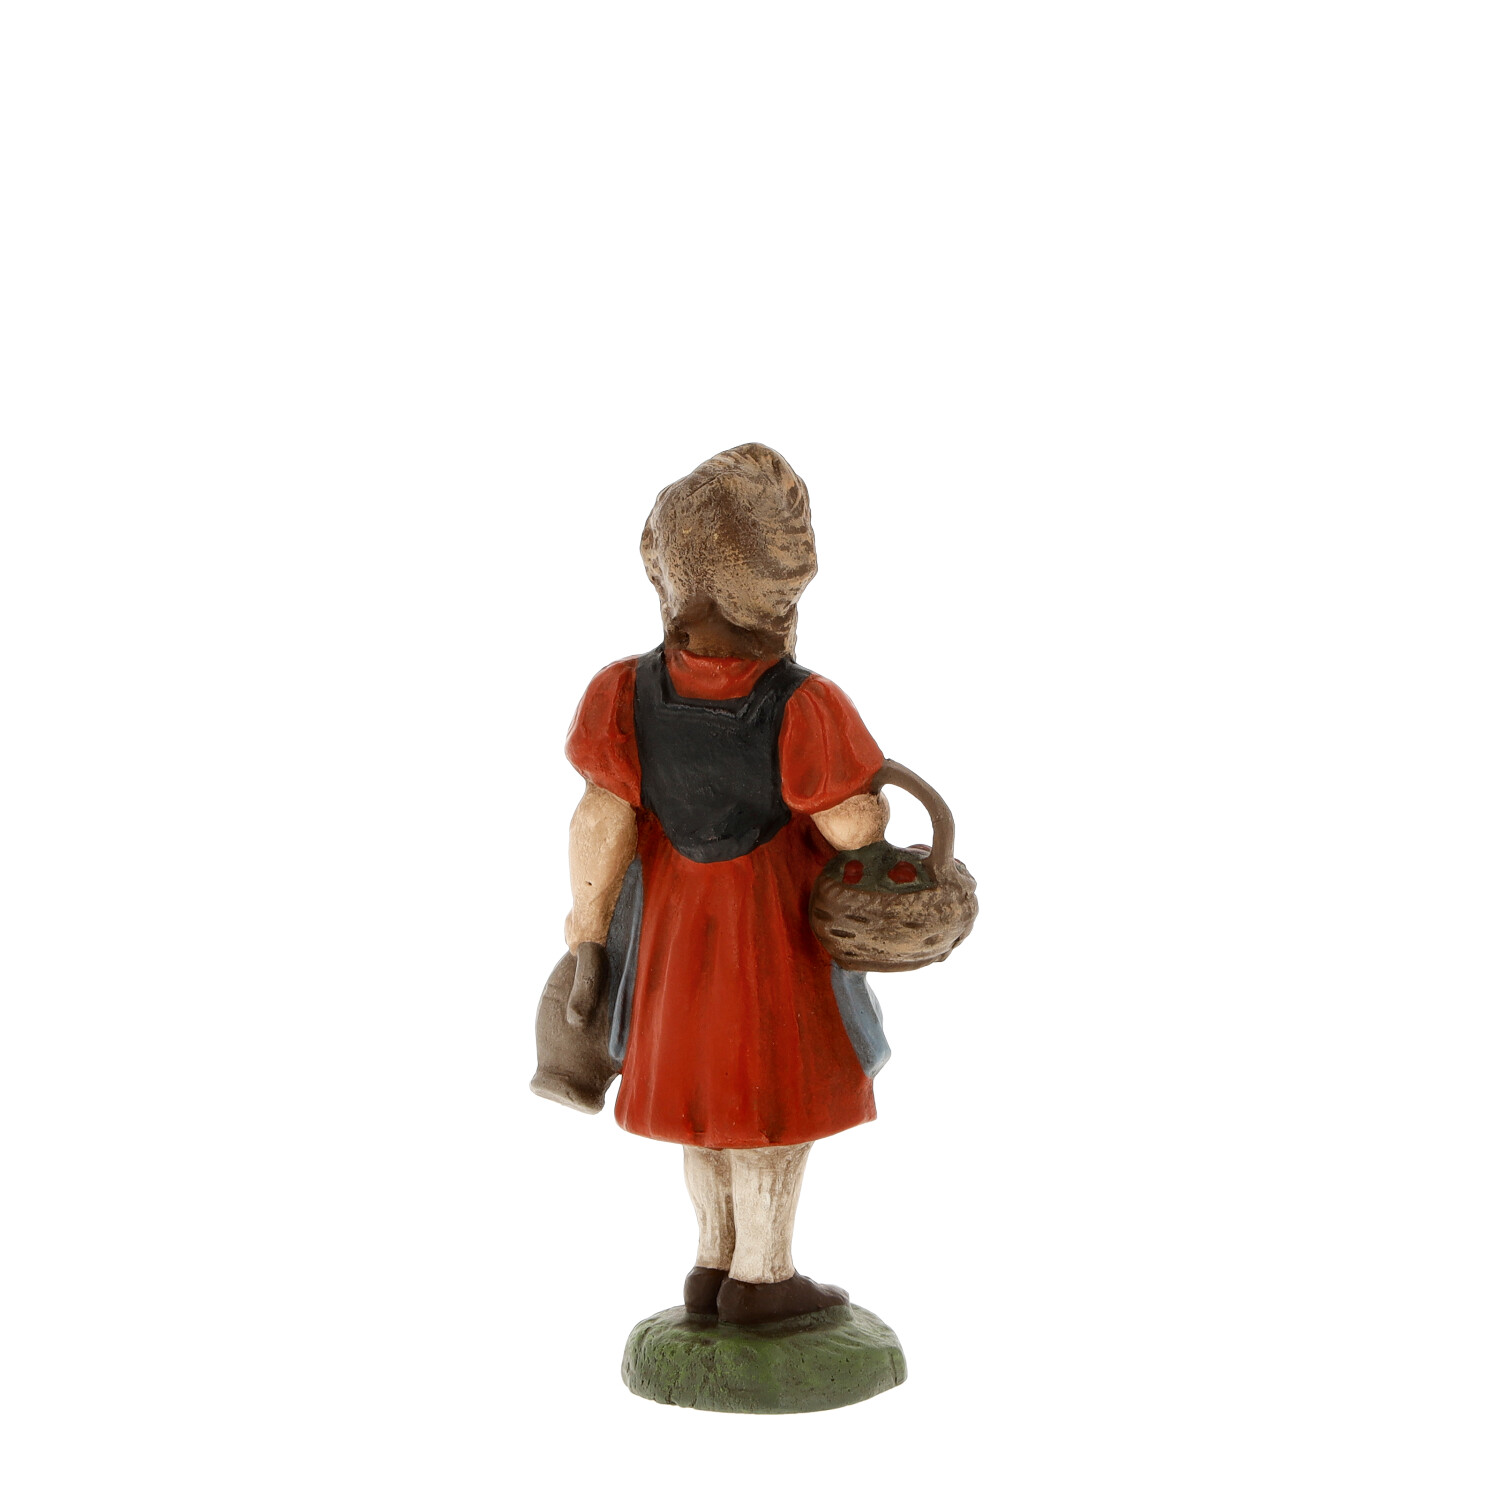 Girls with basket and jug - Marolin Nativity figure - made in Germany